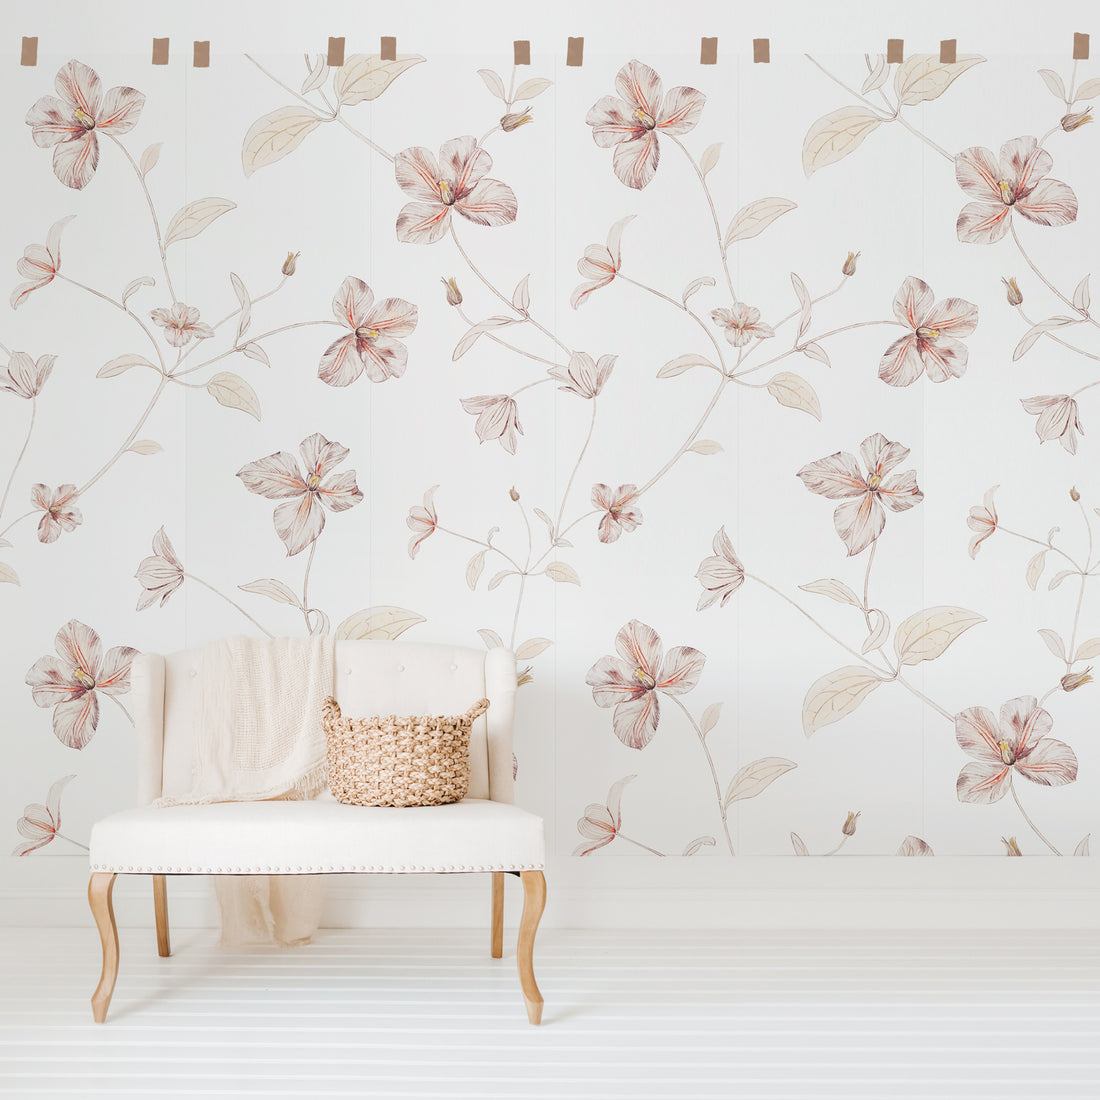 Pink floral design wall mural for minimal chic bohemian interiors